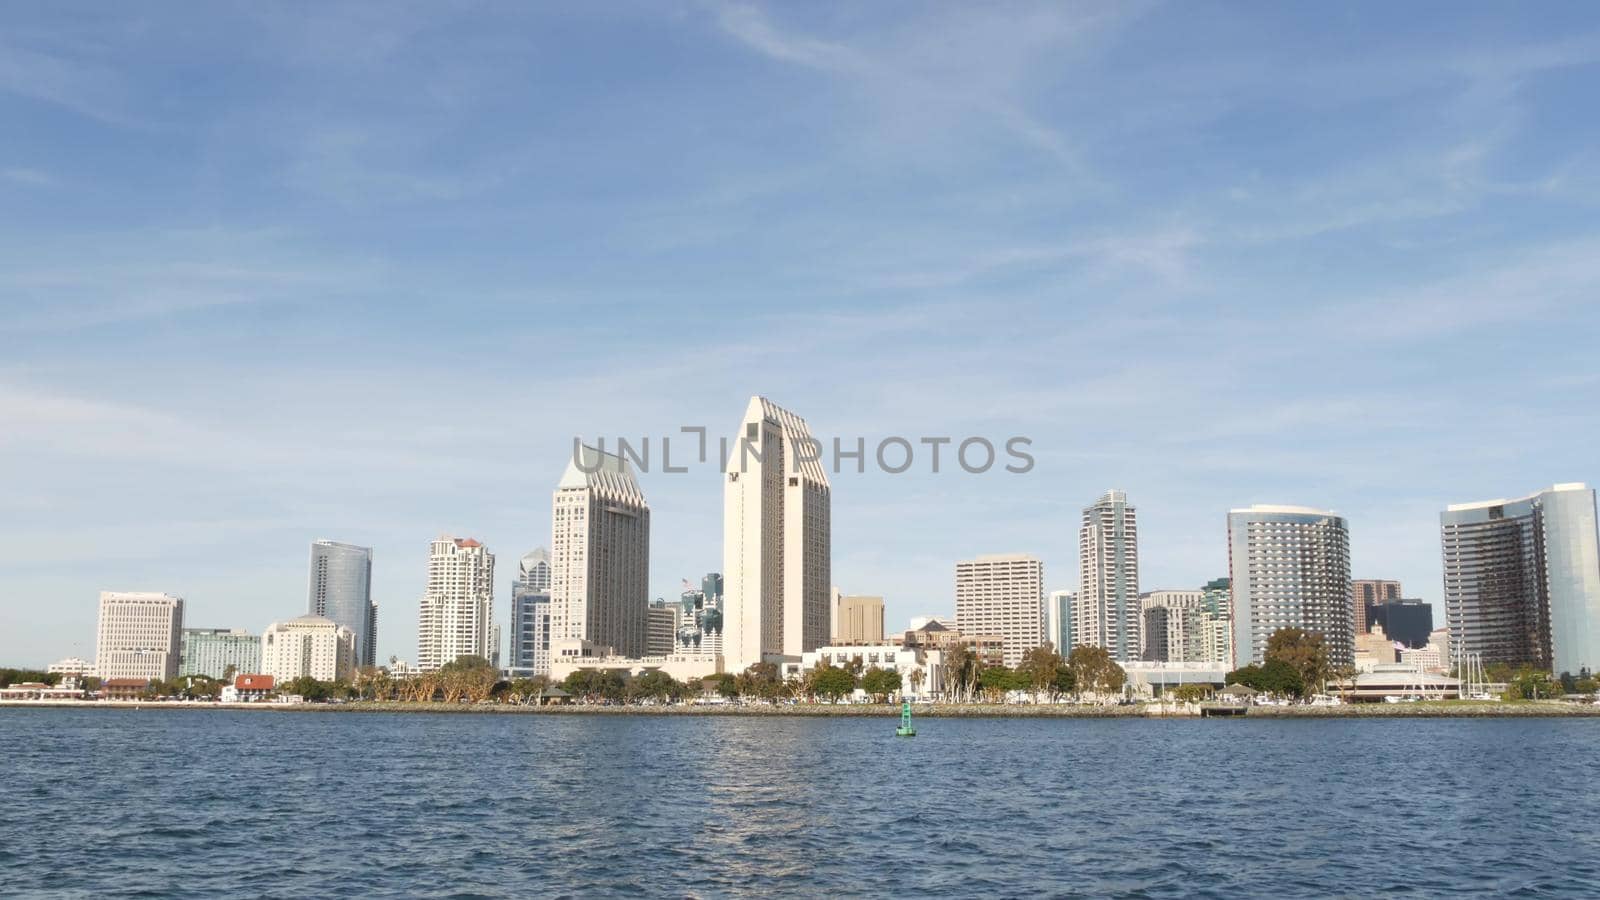 Metropolis urban skyline, highrise skyscrapers of city downtown, San Diego Bay, California USA. Waterfront buildings near pacific ocean harbour. View from boat, nautical public transport to Coronado.